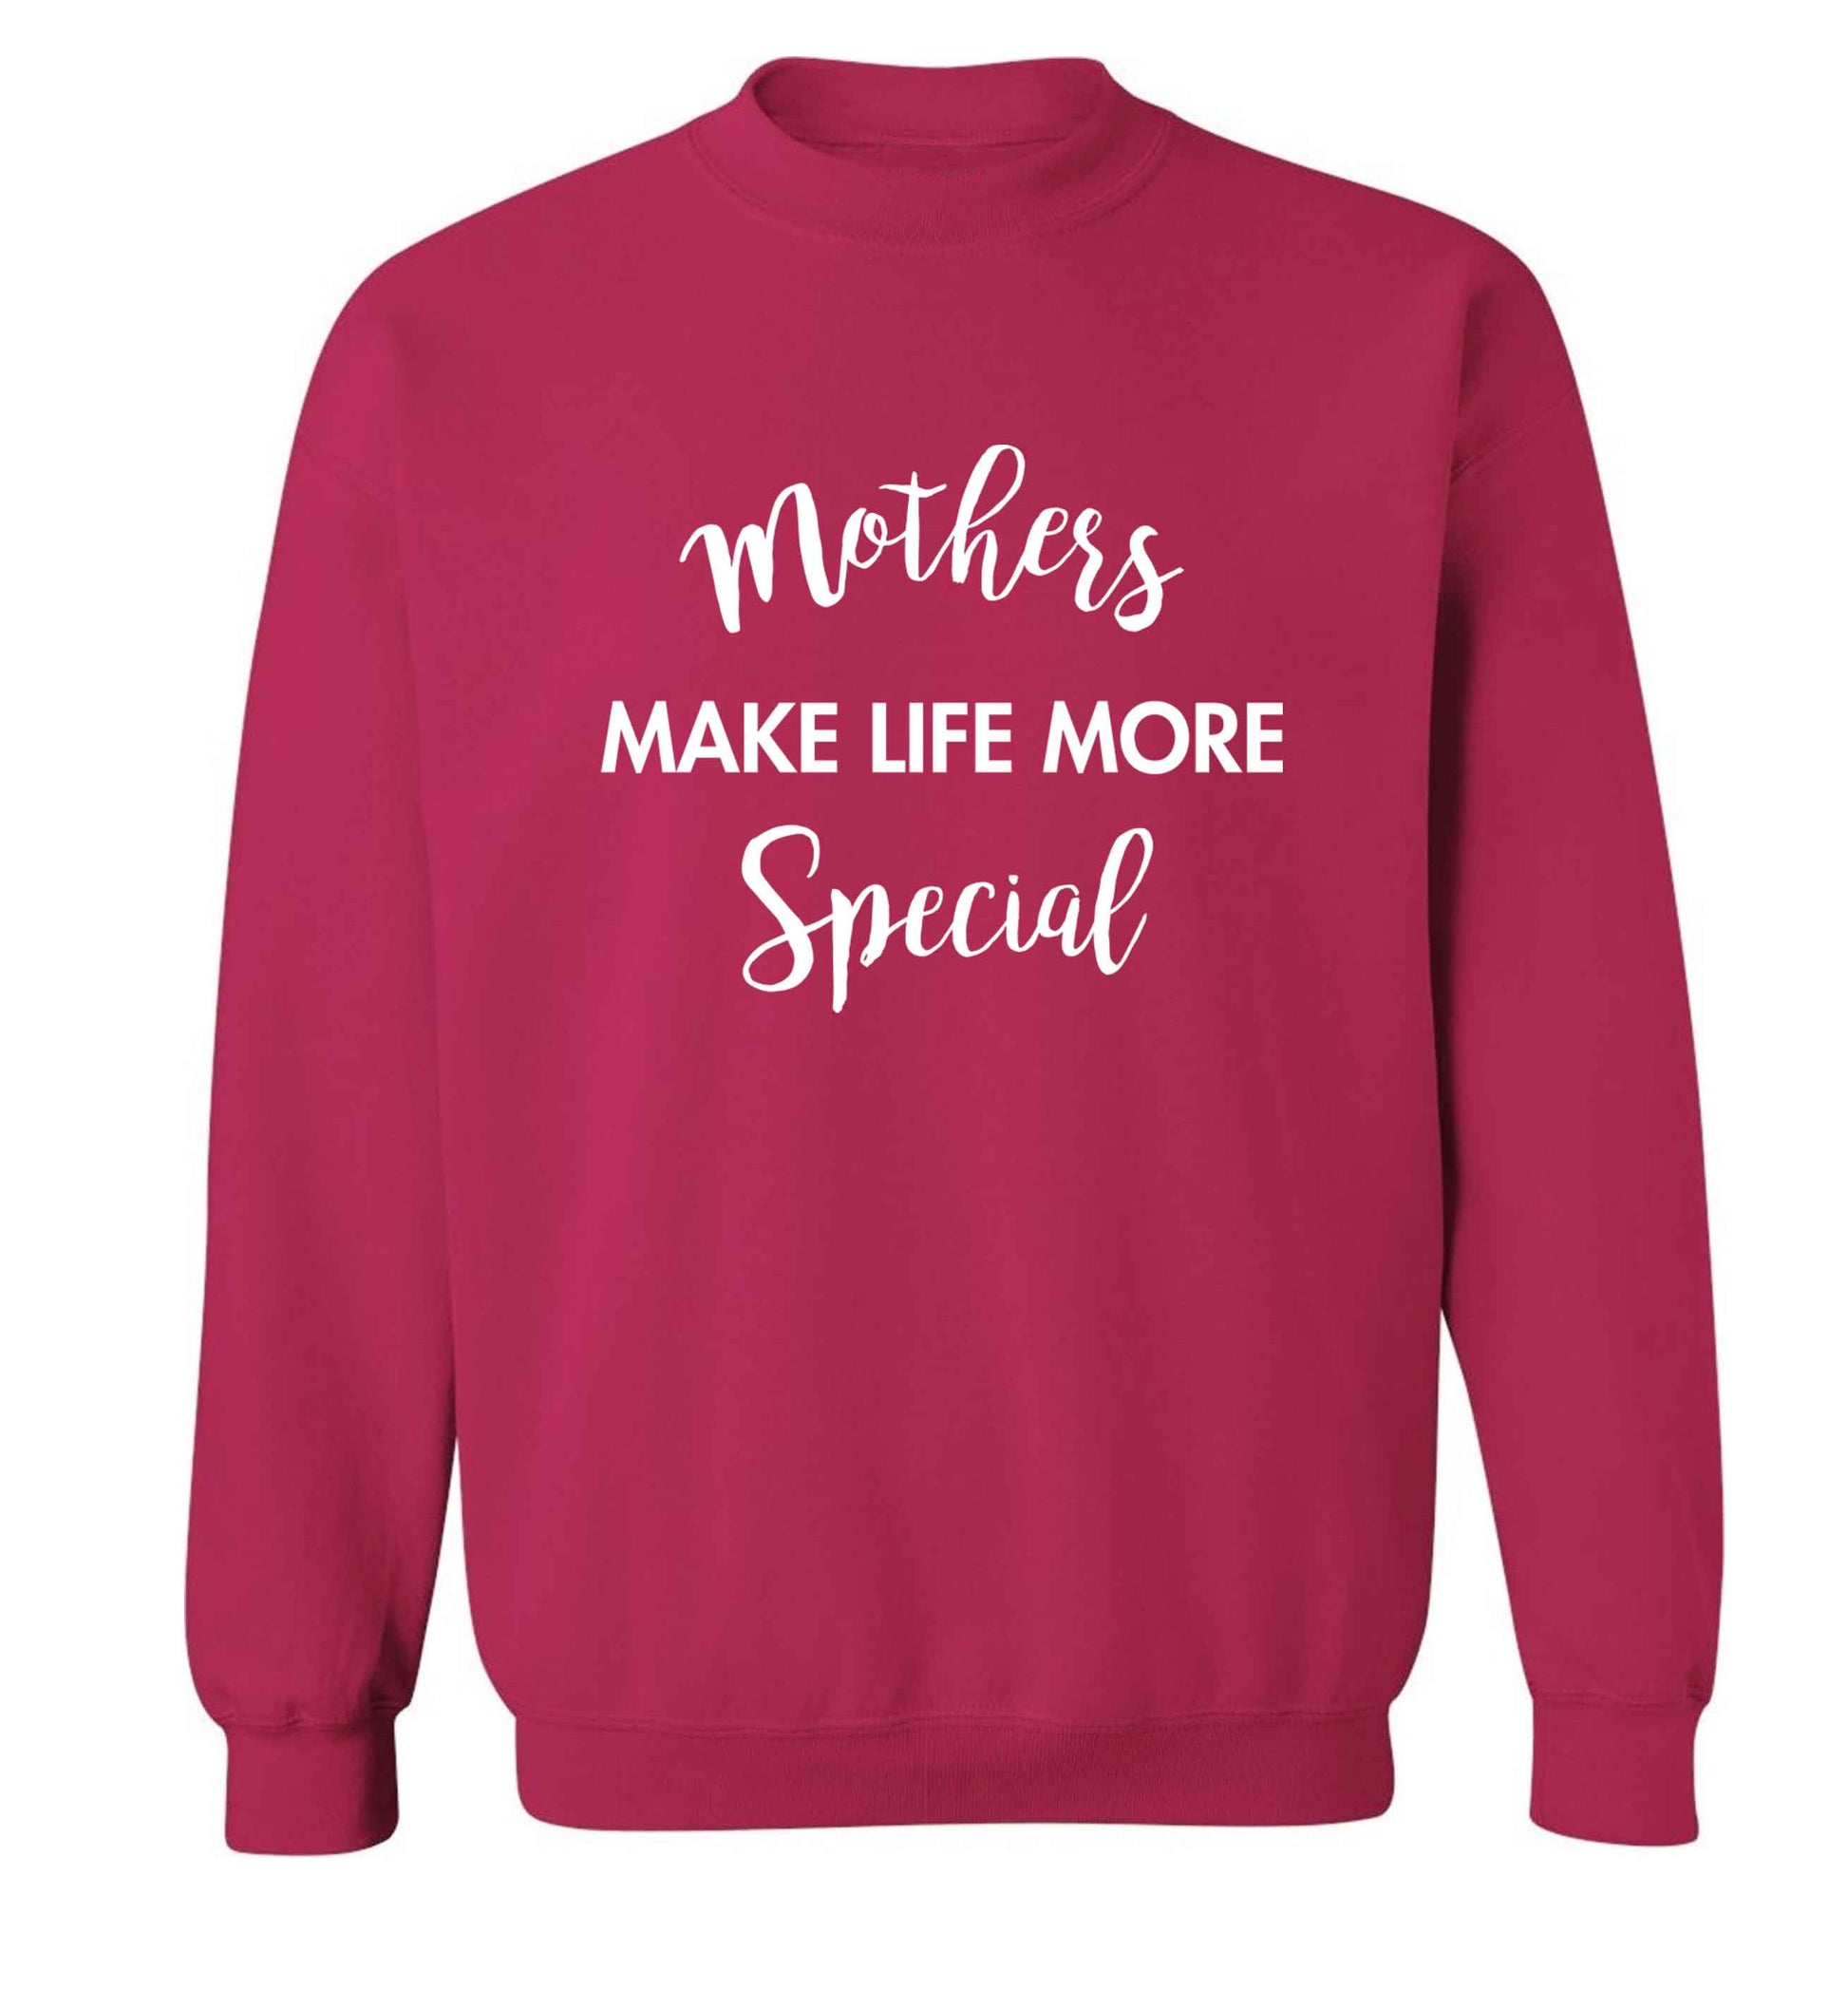 Mother's make life more special adult's unisex pink sweater 2XL